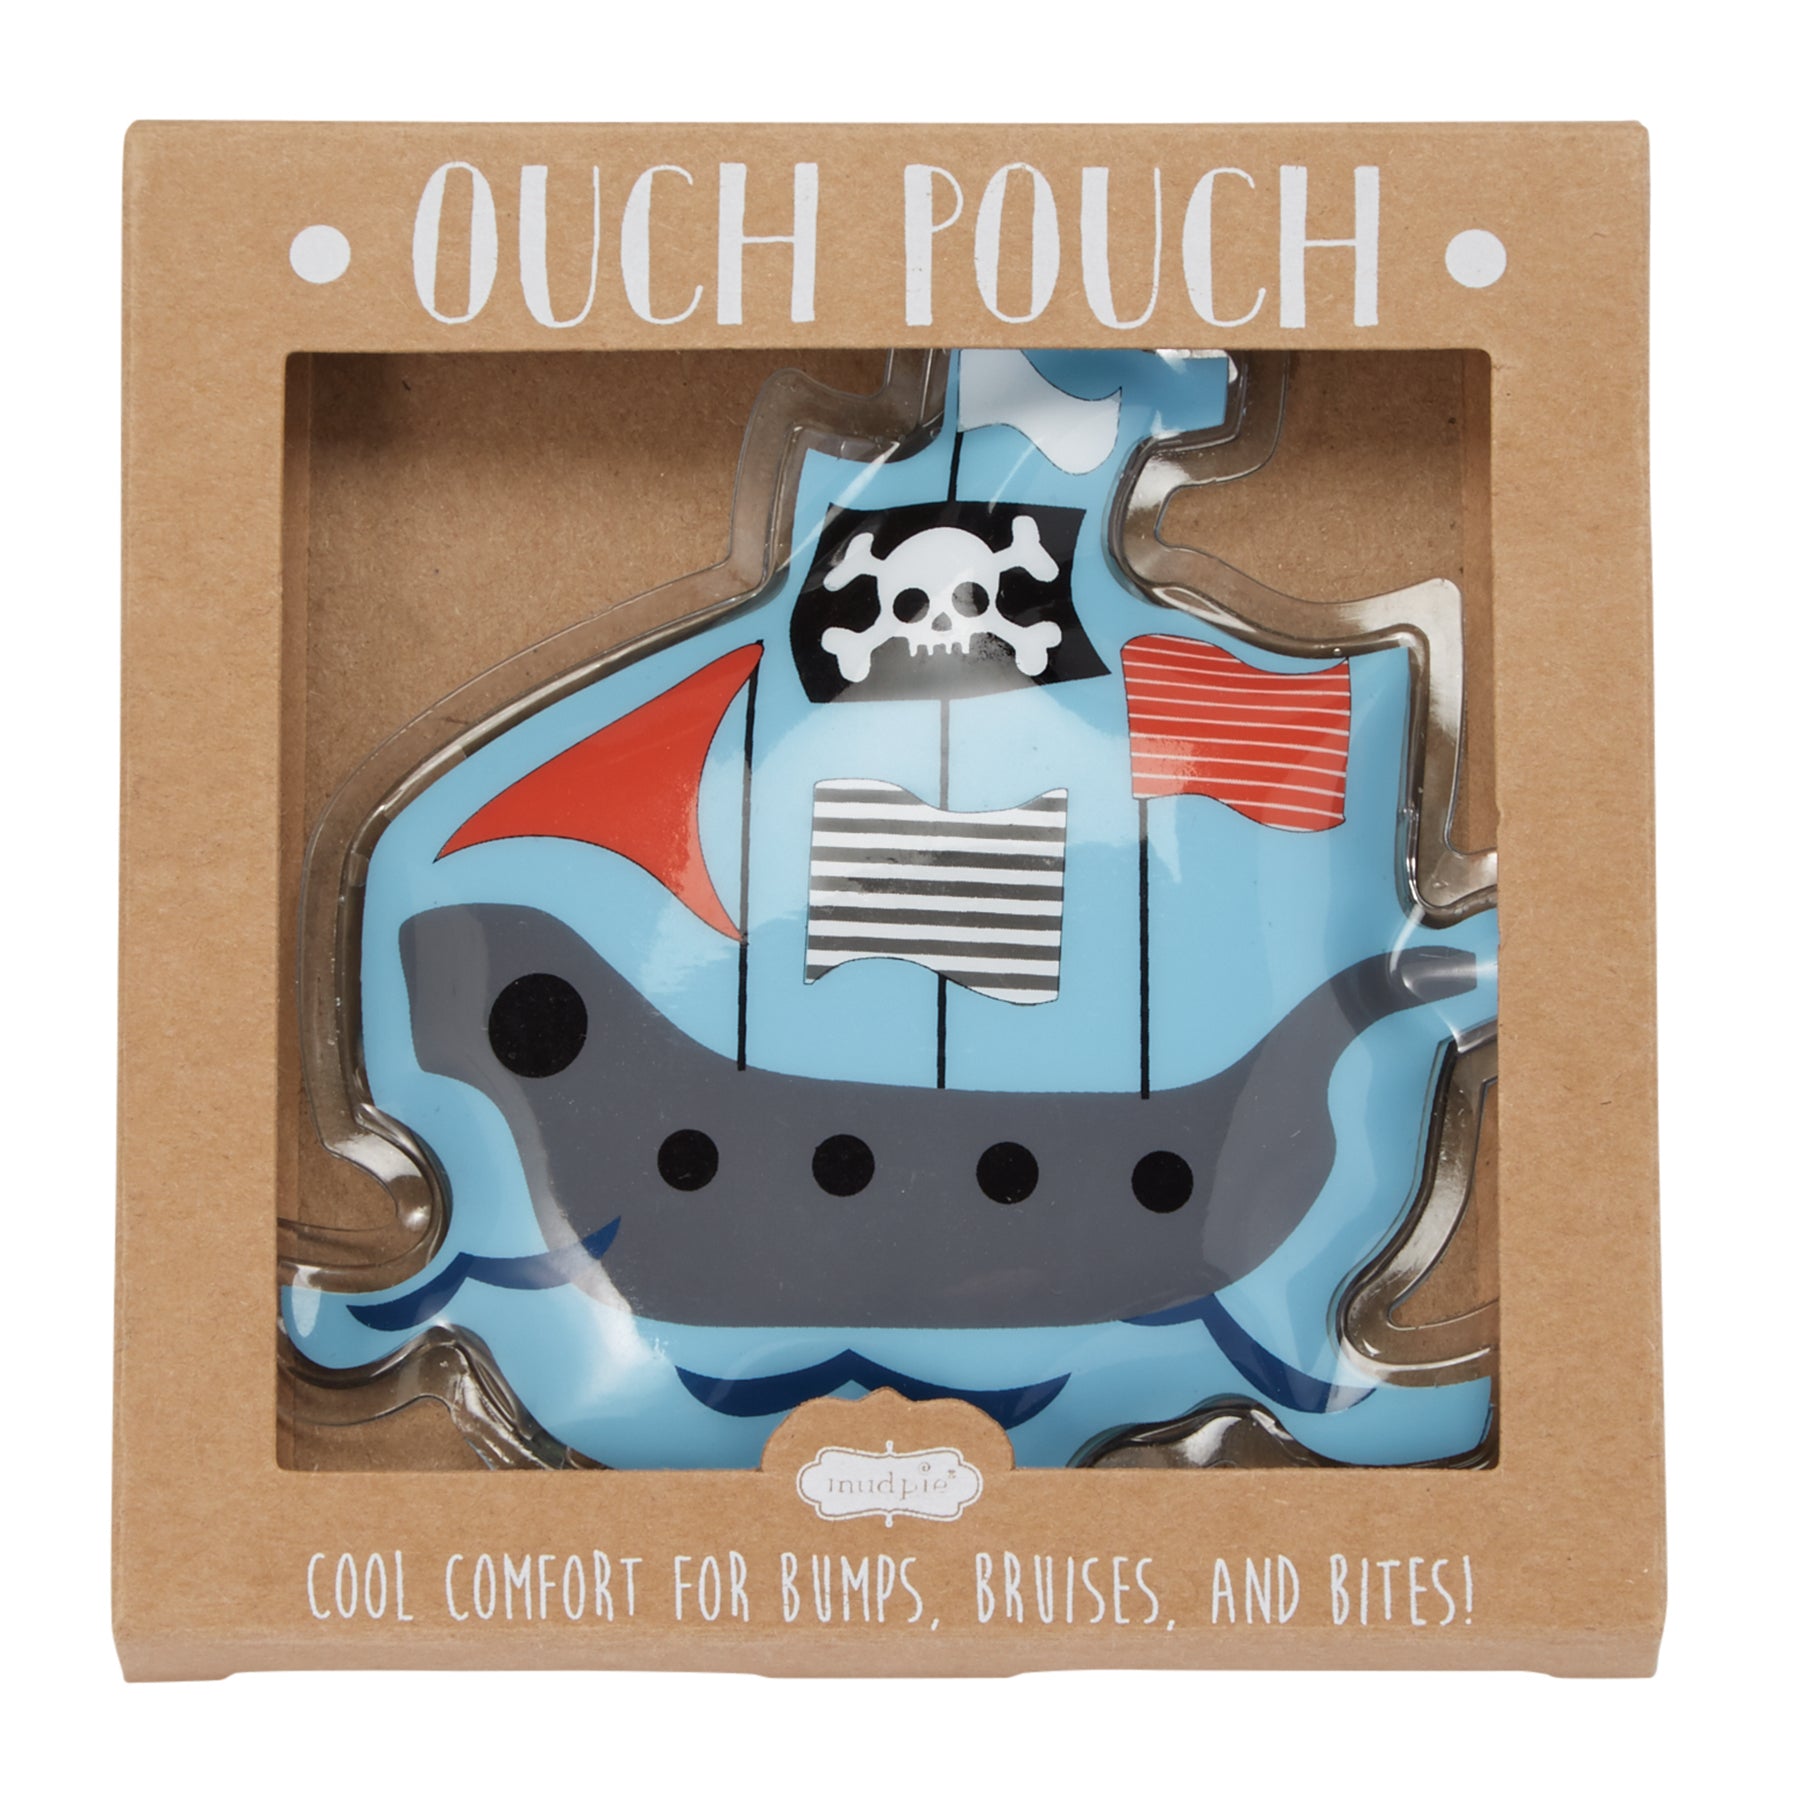 PIRATE SHIP OUCH POUCH